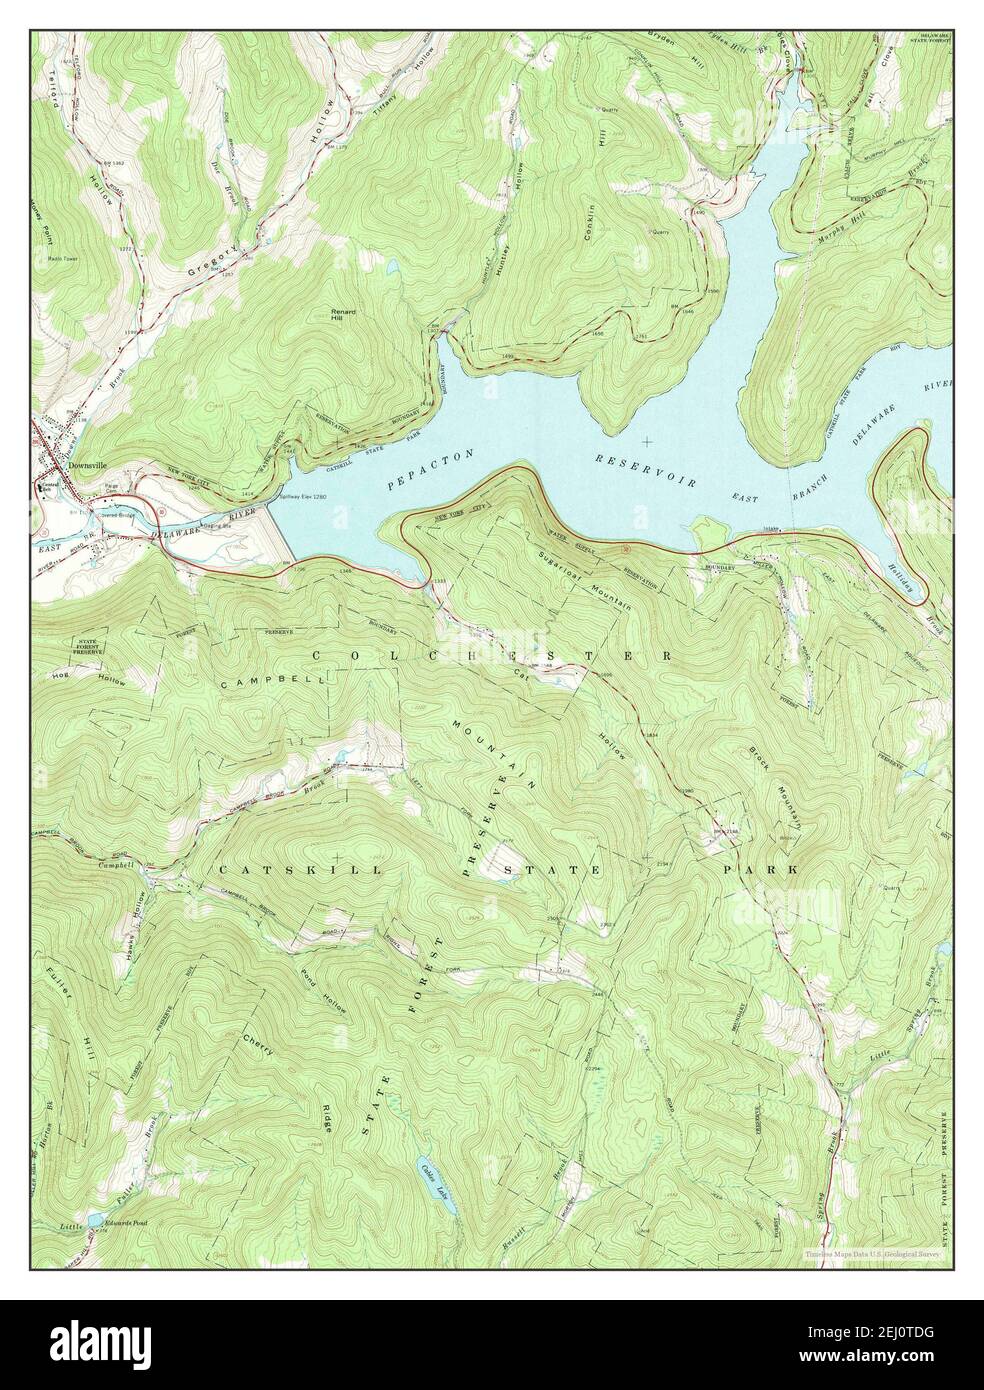 Downsville, New York, map 1965, 1:24000, United States of America by Timeless Maps, data U.S. Geological Survey Stock Photo